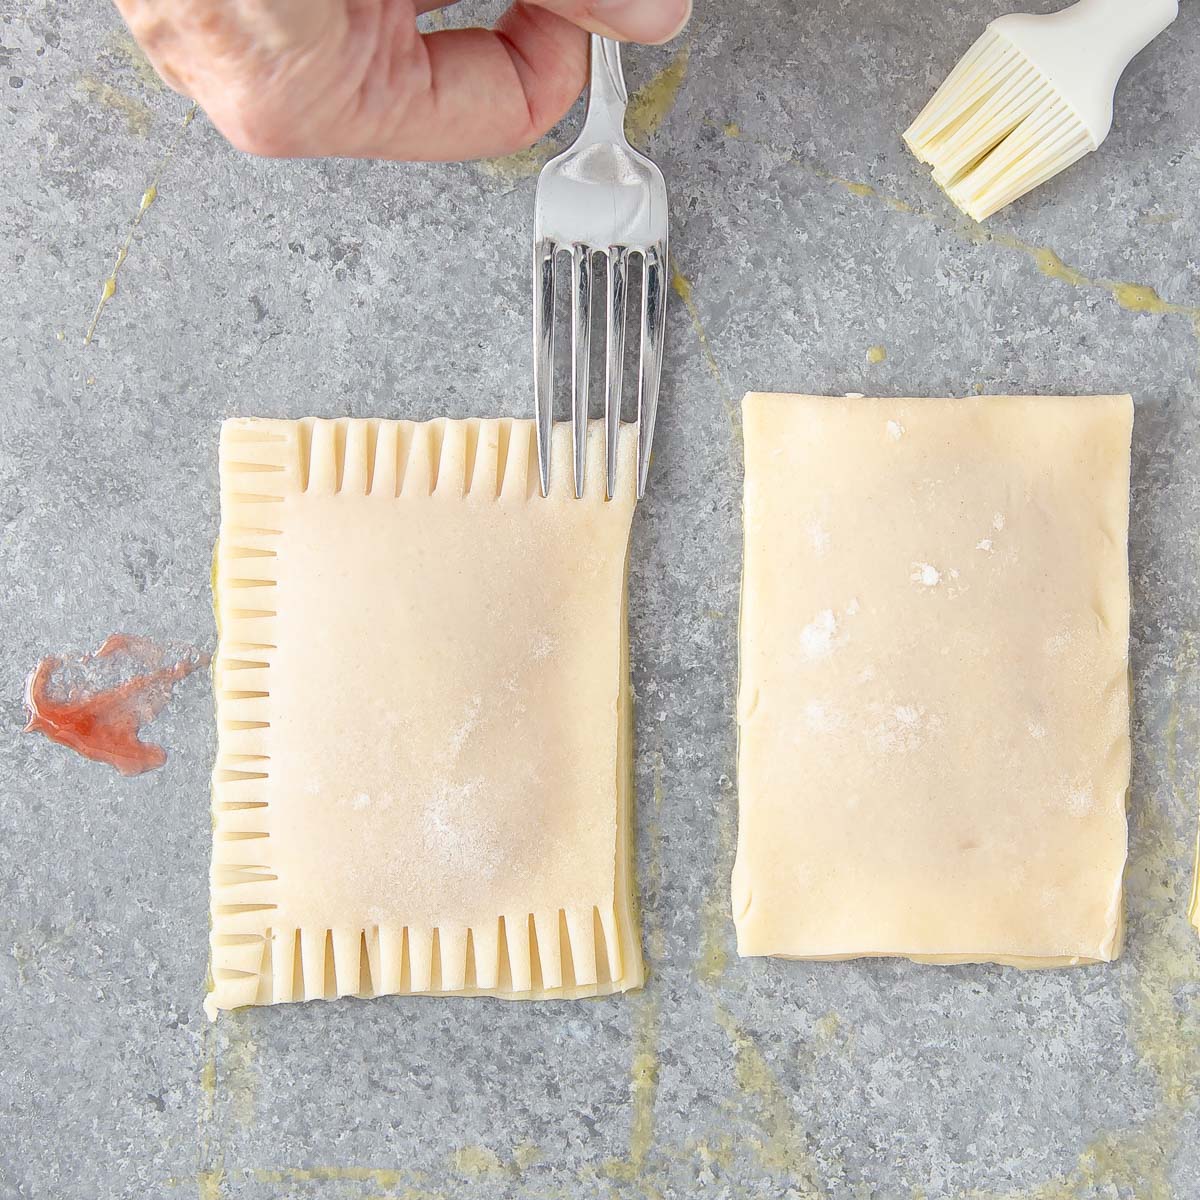 crimping edges of pie crust with a fork to make pop tarts